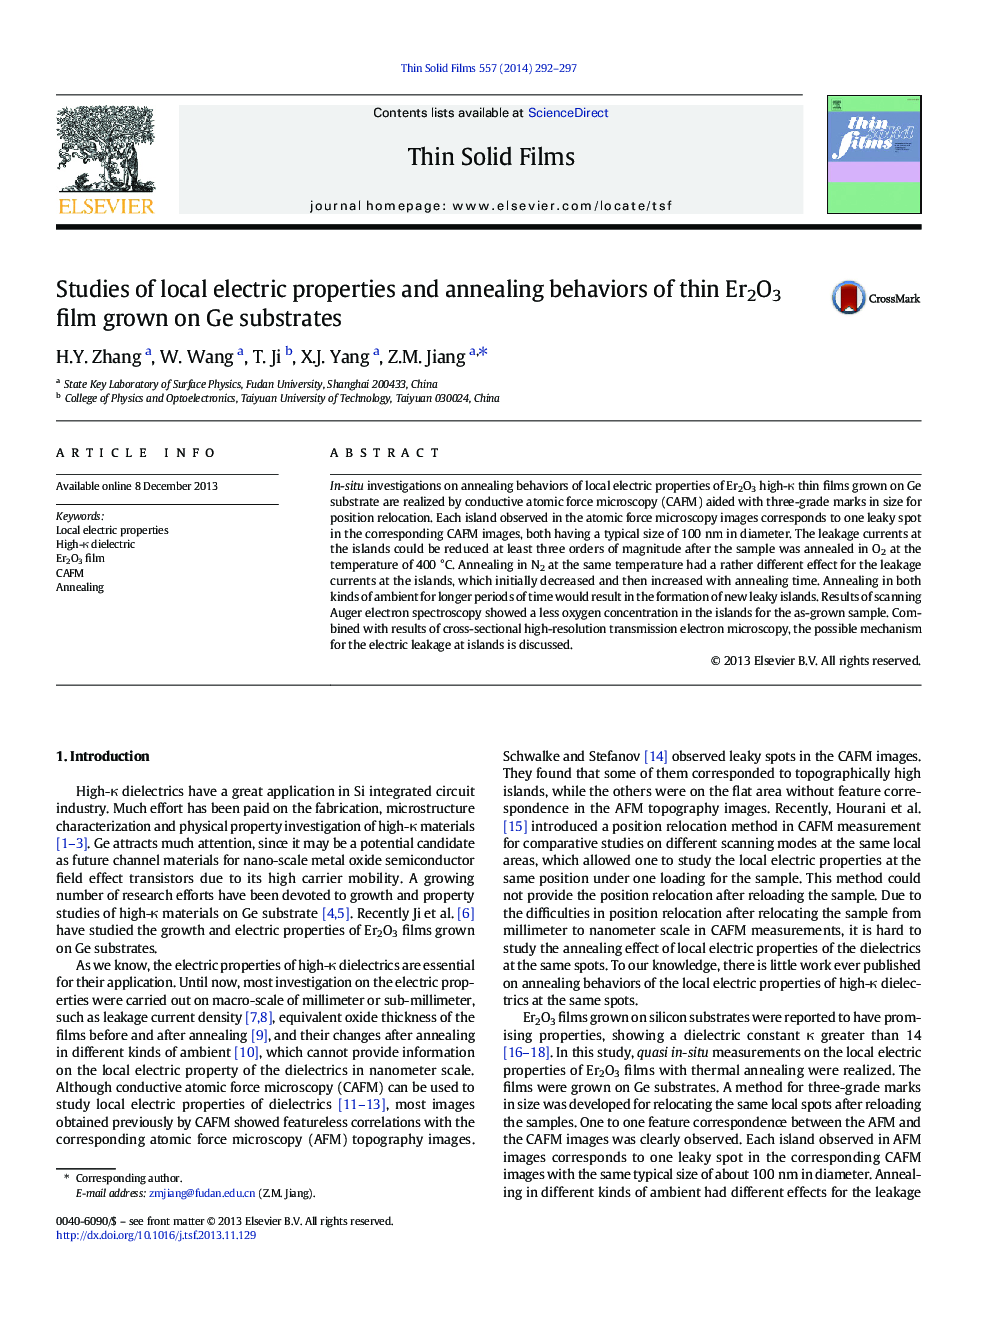 Studies of local electric properties and annealing behaviors of thin Er2O3 film grown on Ge substrates